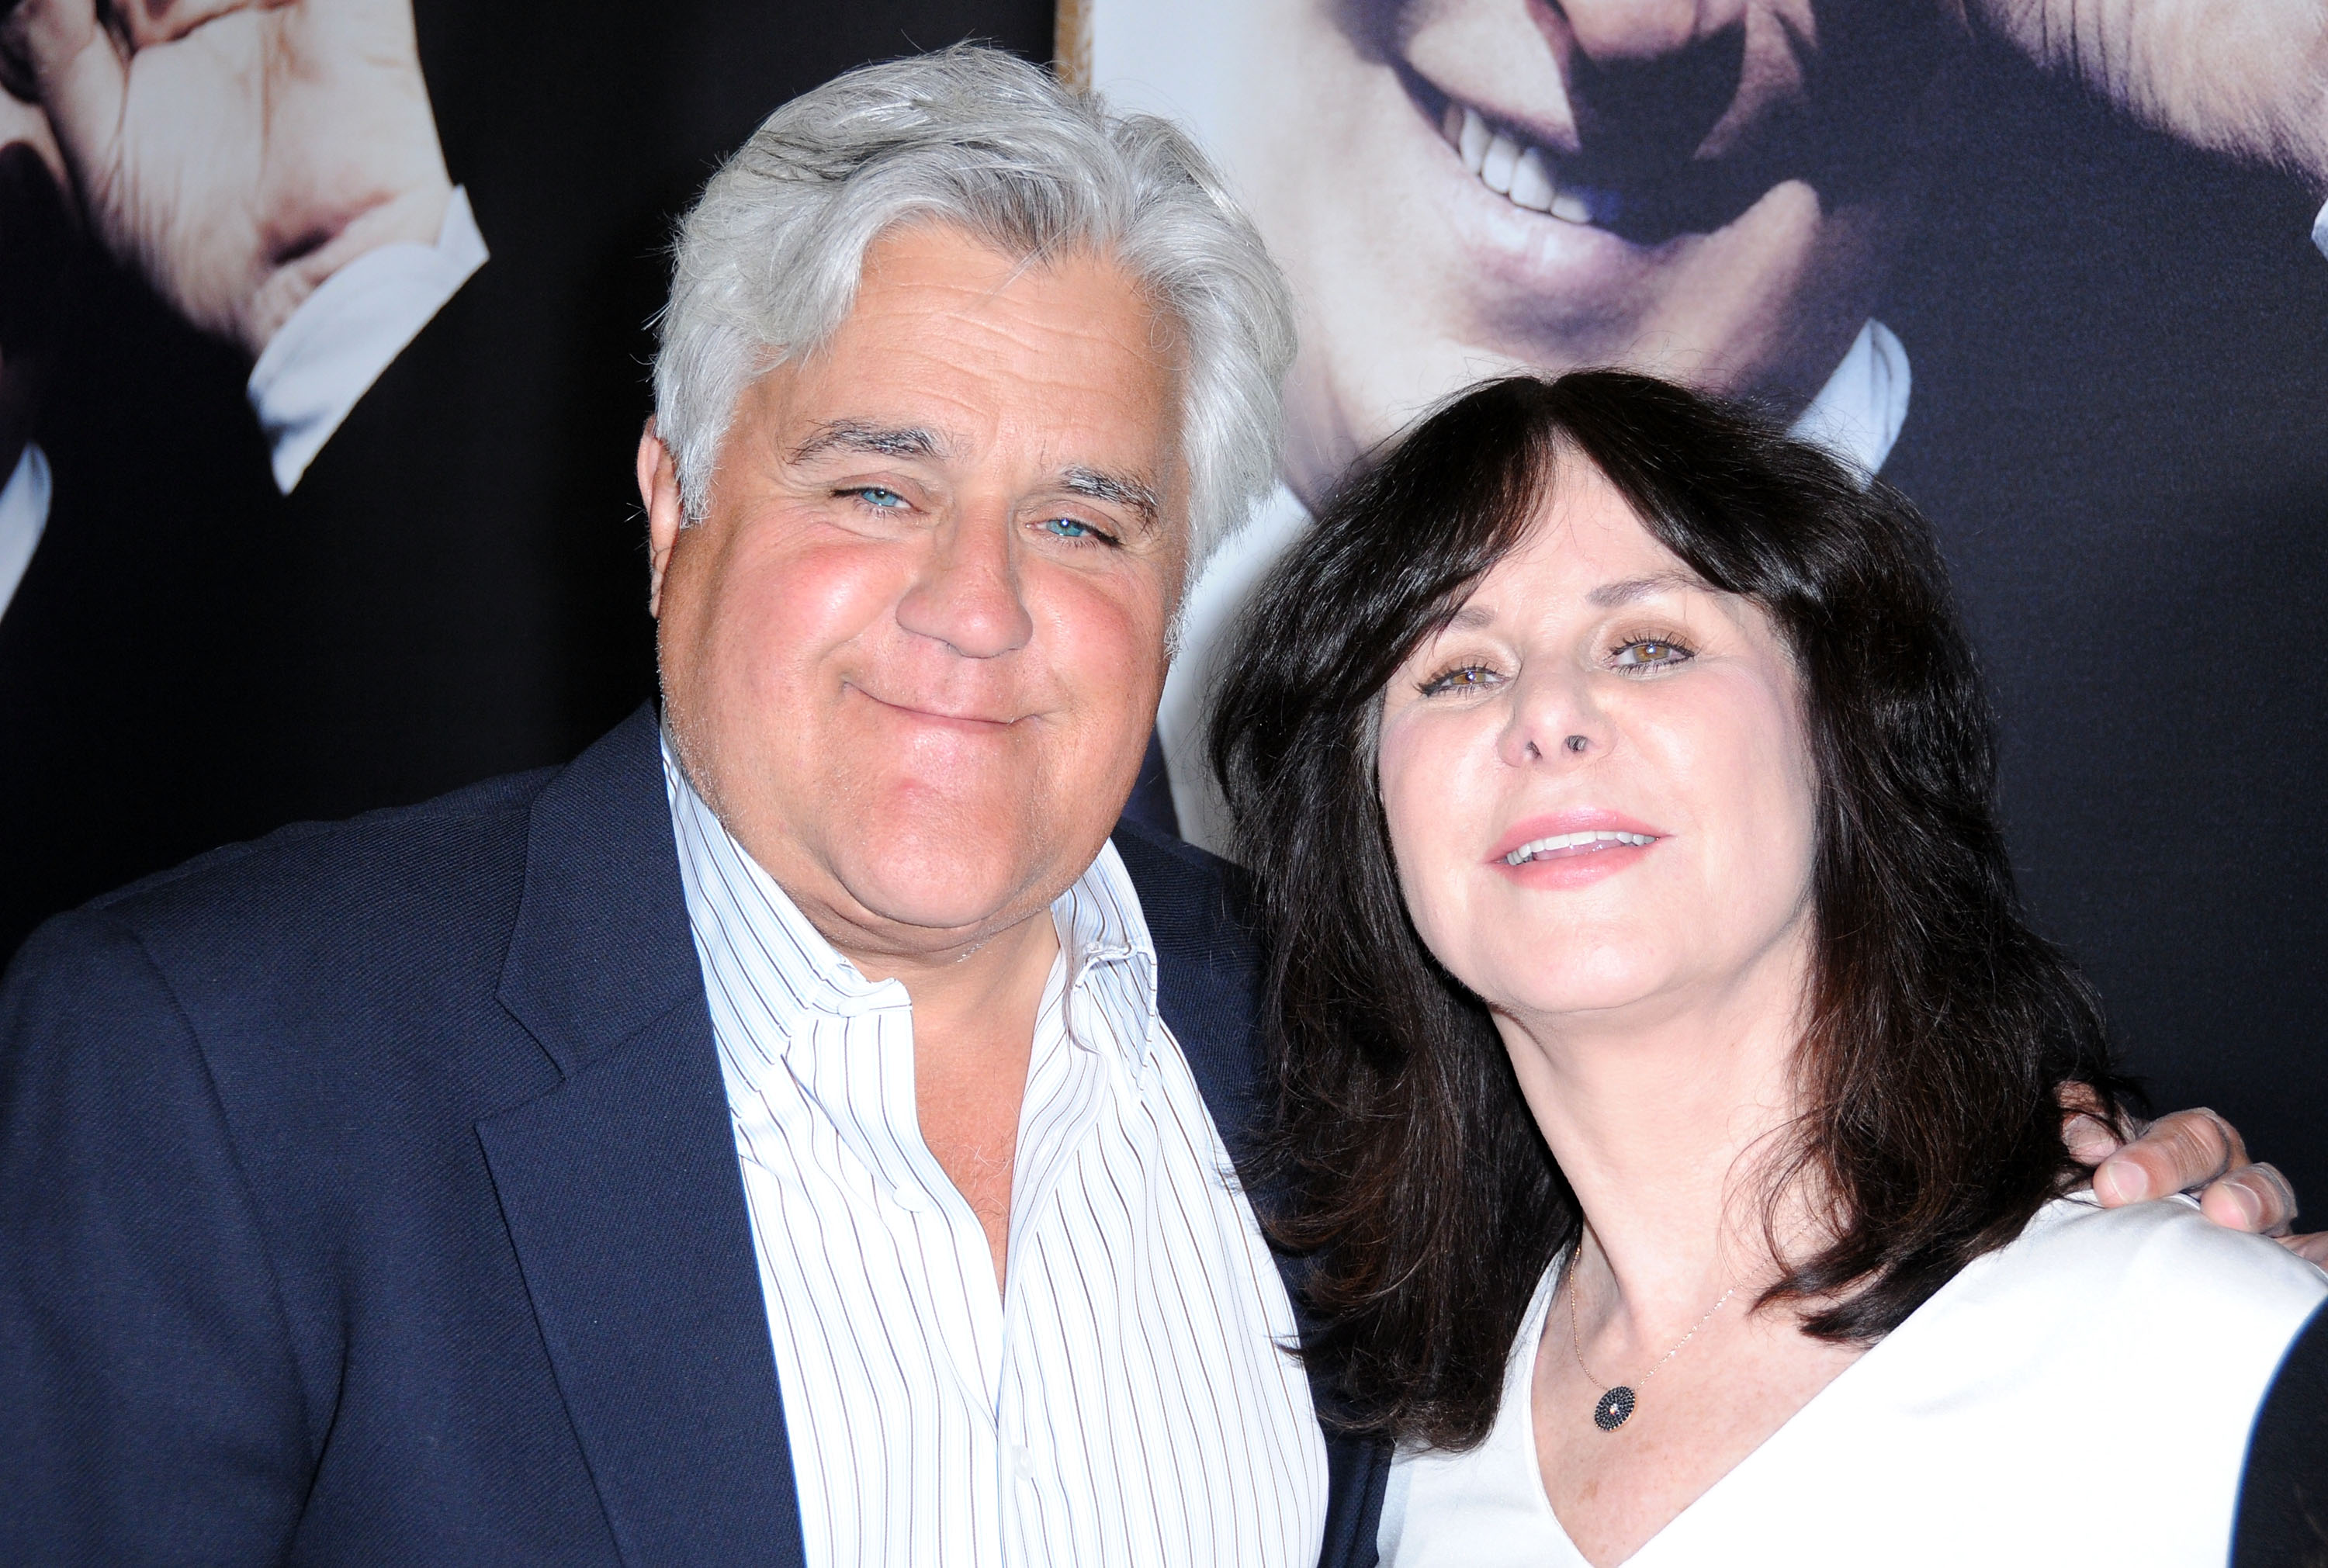 Jay Leno and Mavis Nicholson-Leno attend an HBO premiere of an exclusive presentation of 'Billy Crystal 700 Sundays'